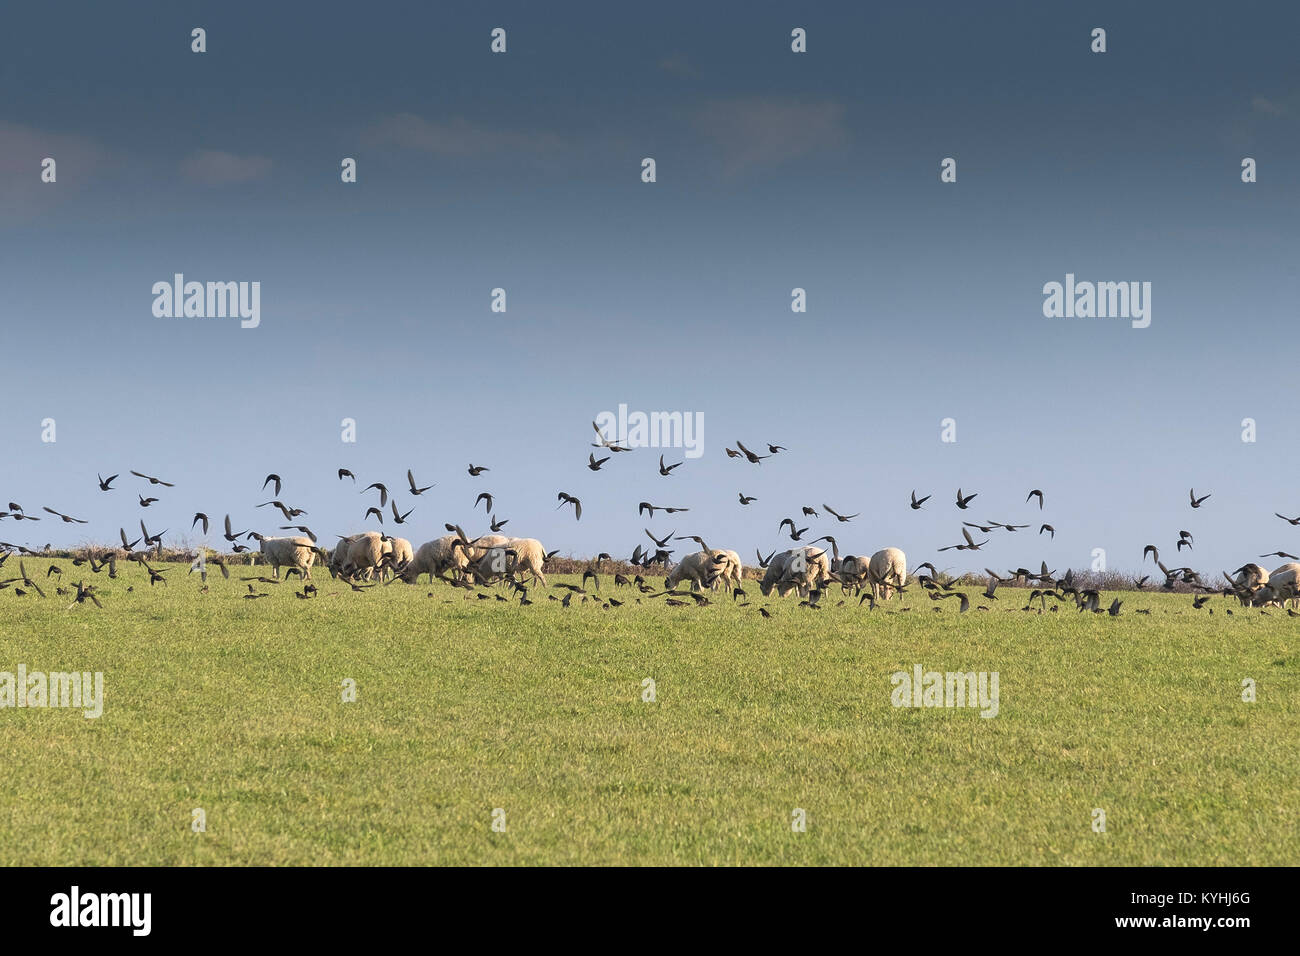 Cornwall countryside - a flock of Starlings flying into a field with sheep in the background. Stock Photo